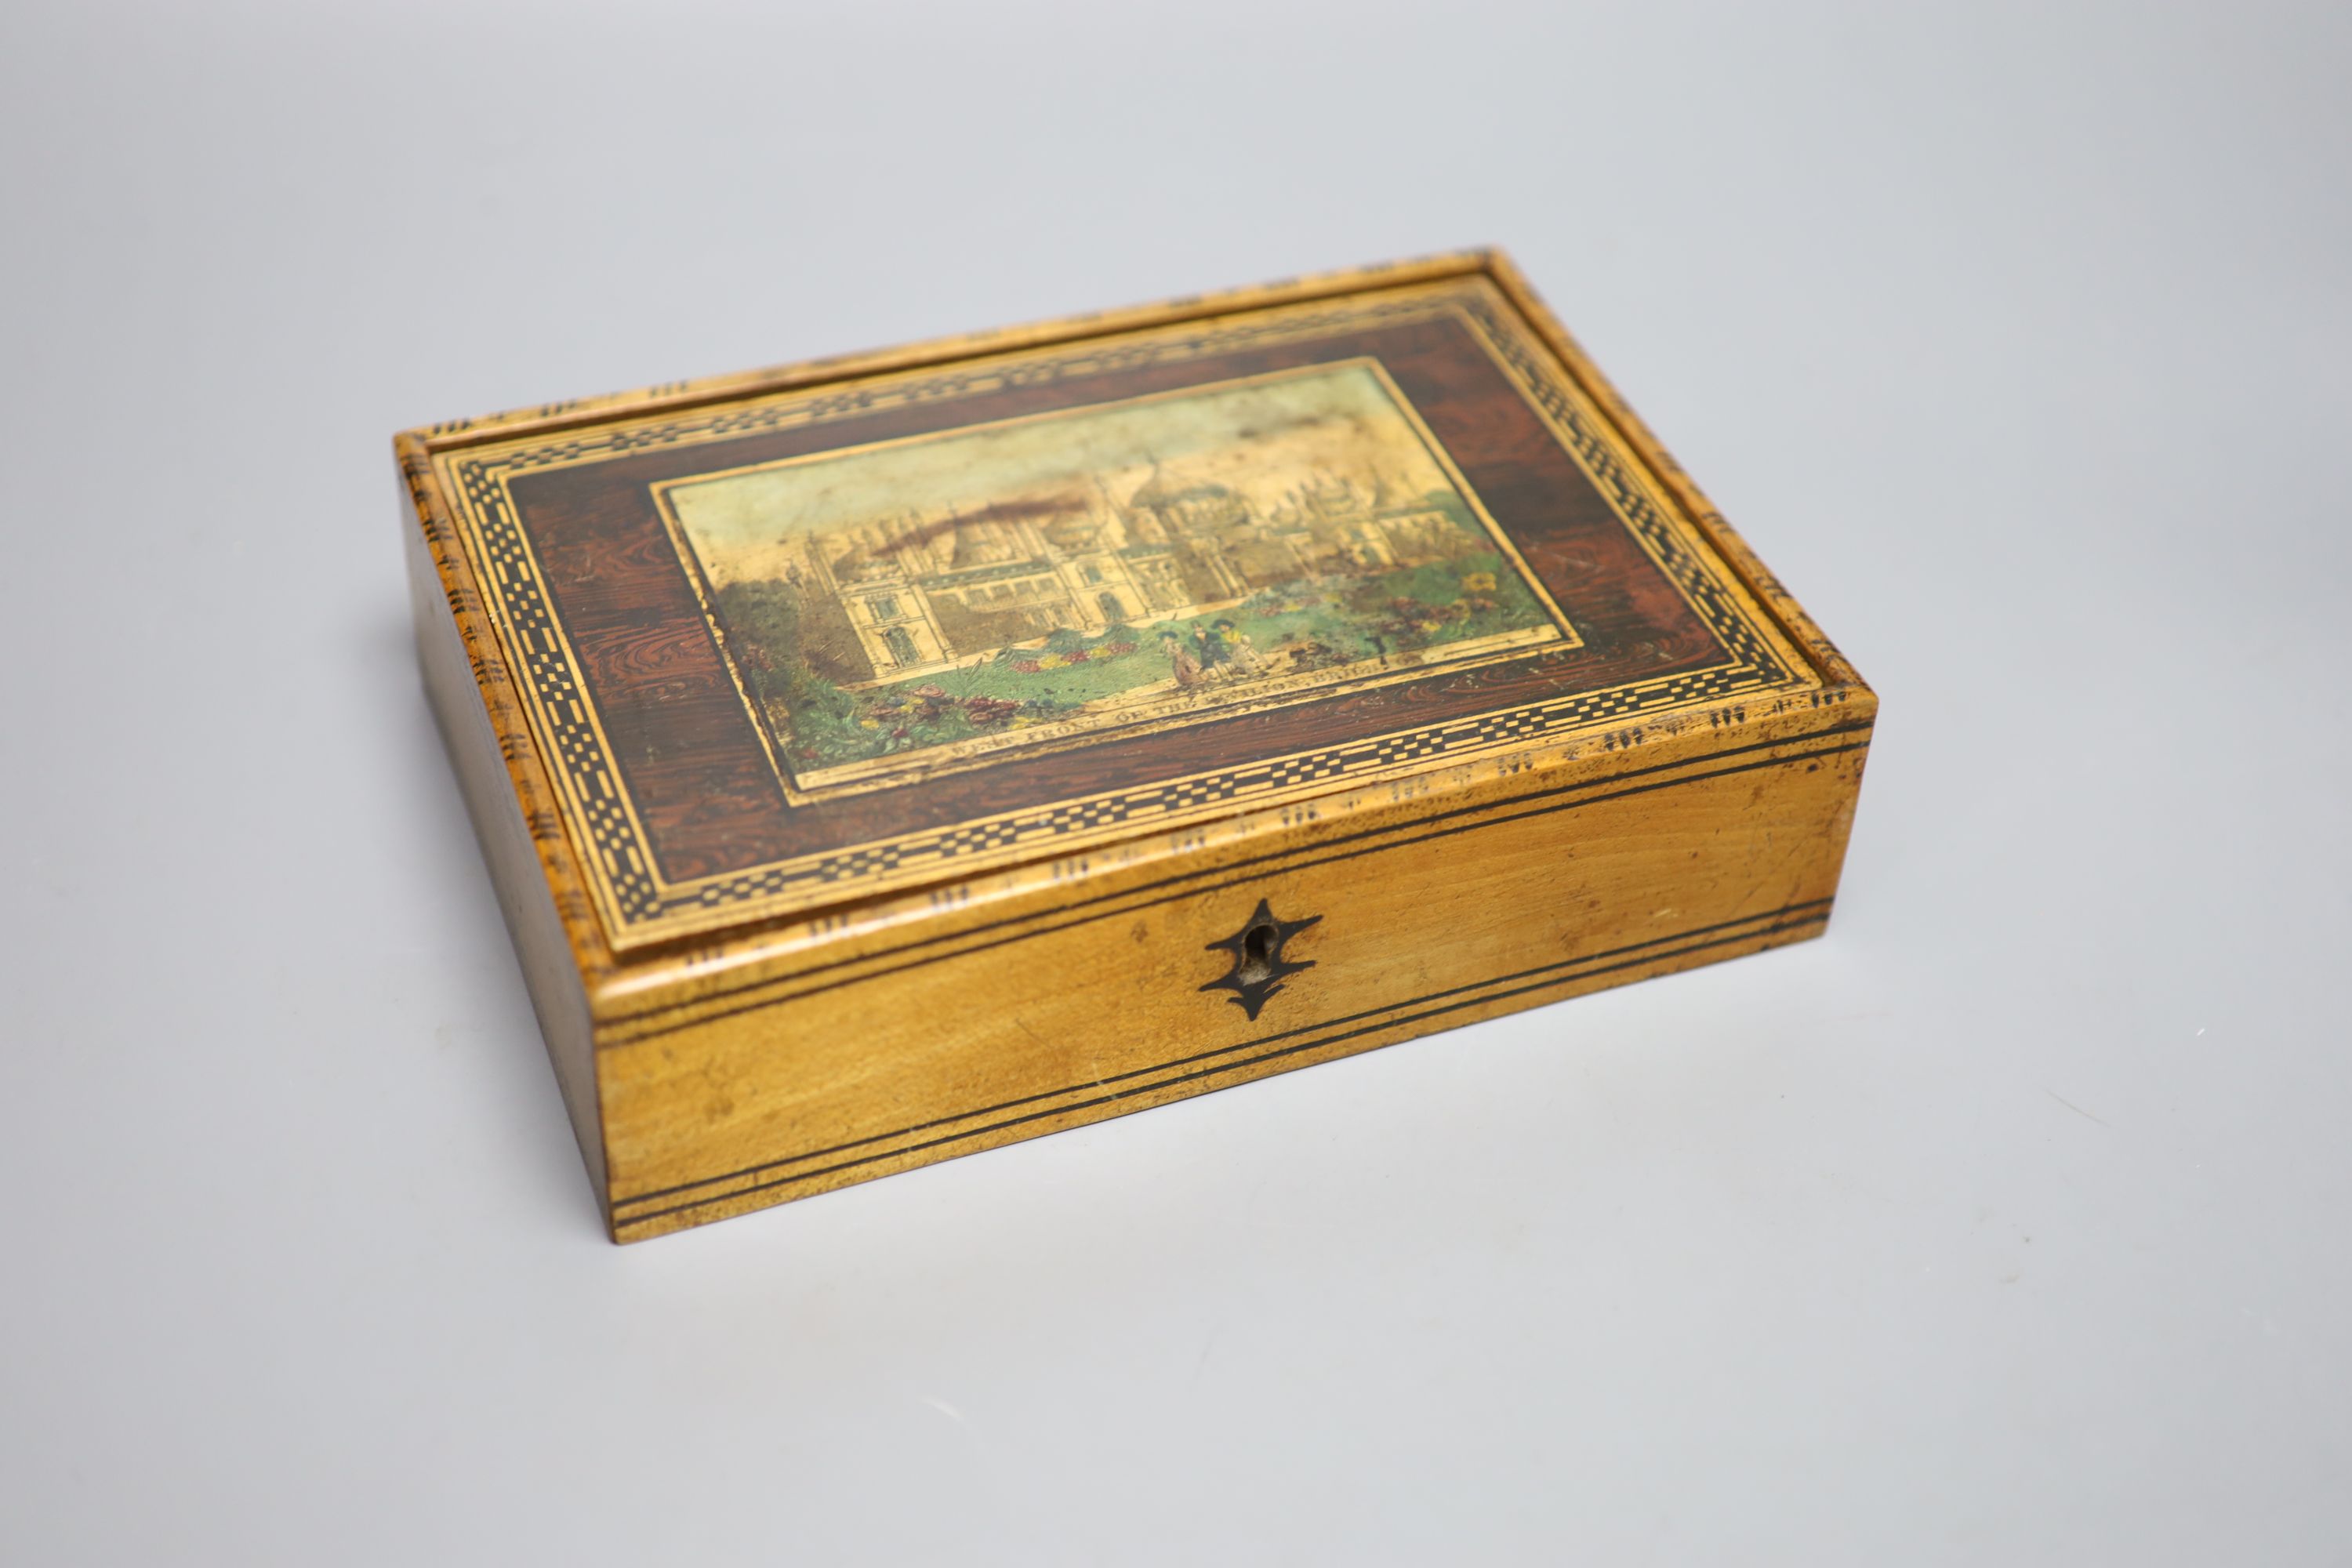 An early Tunbridge ware 'West Front of the Pavilion Brighton' sycamore box, probably Wise, c.1820, 22cm